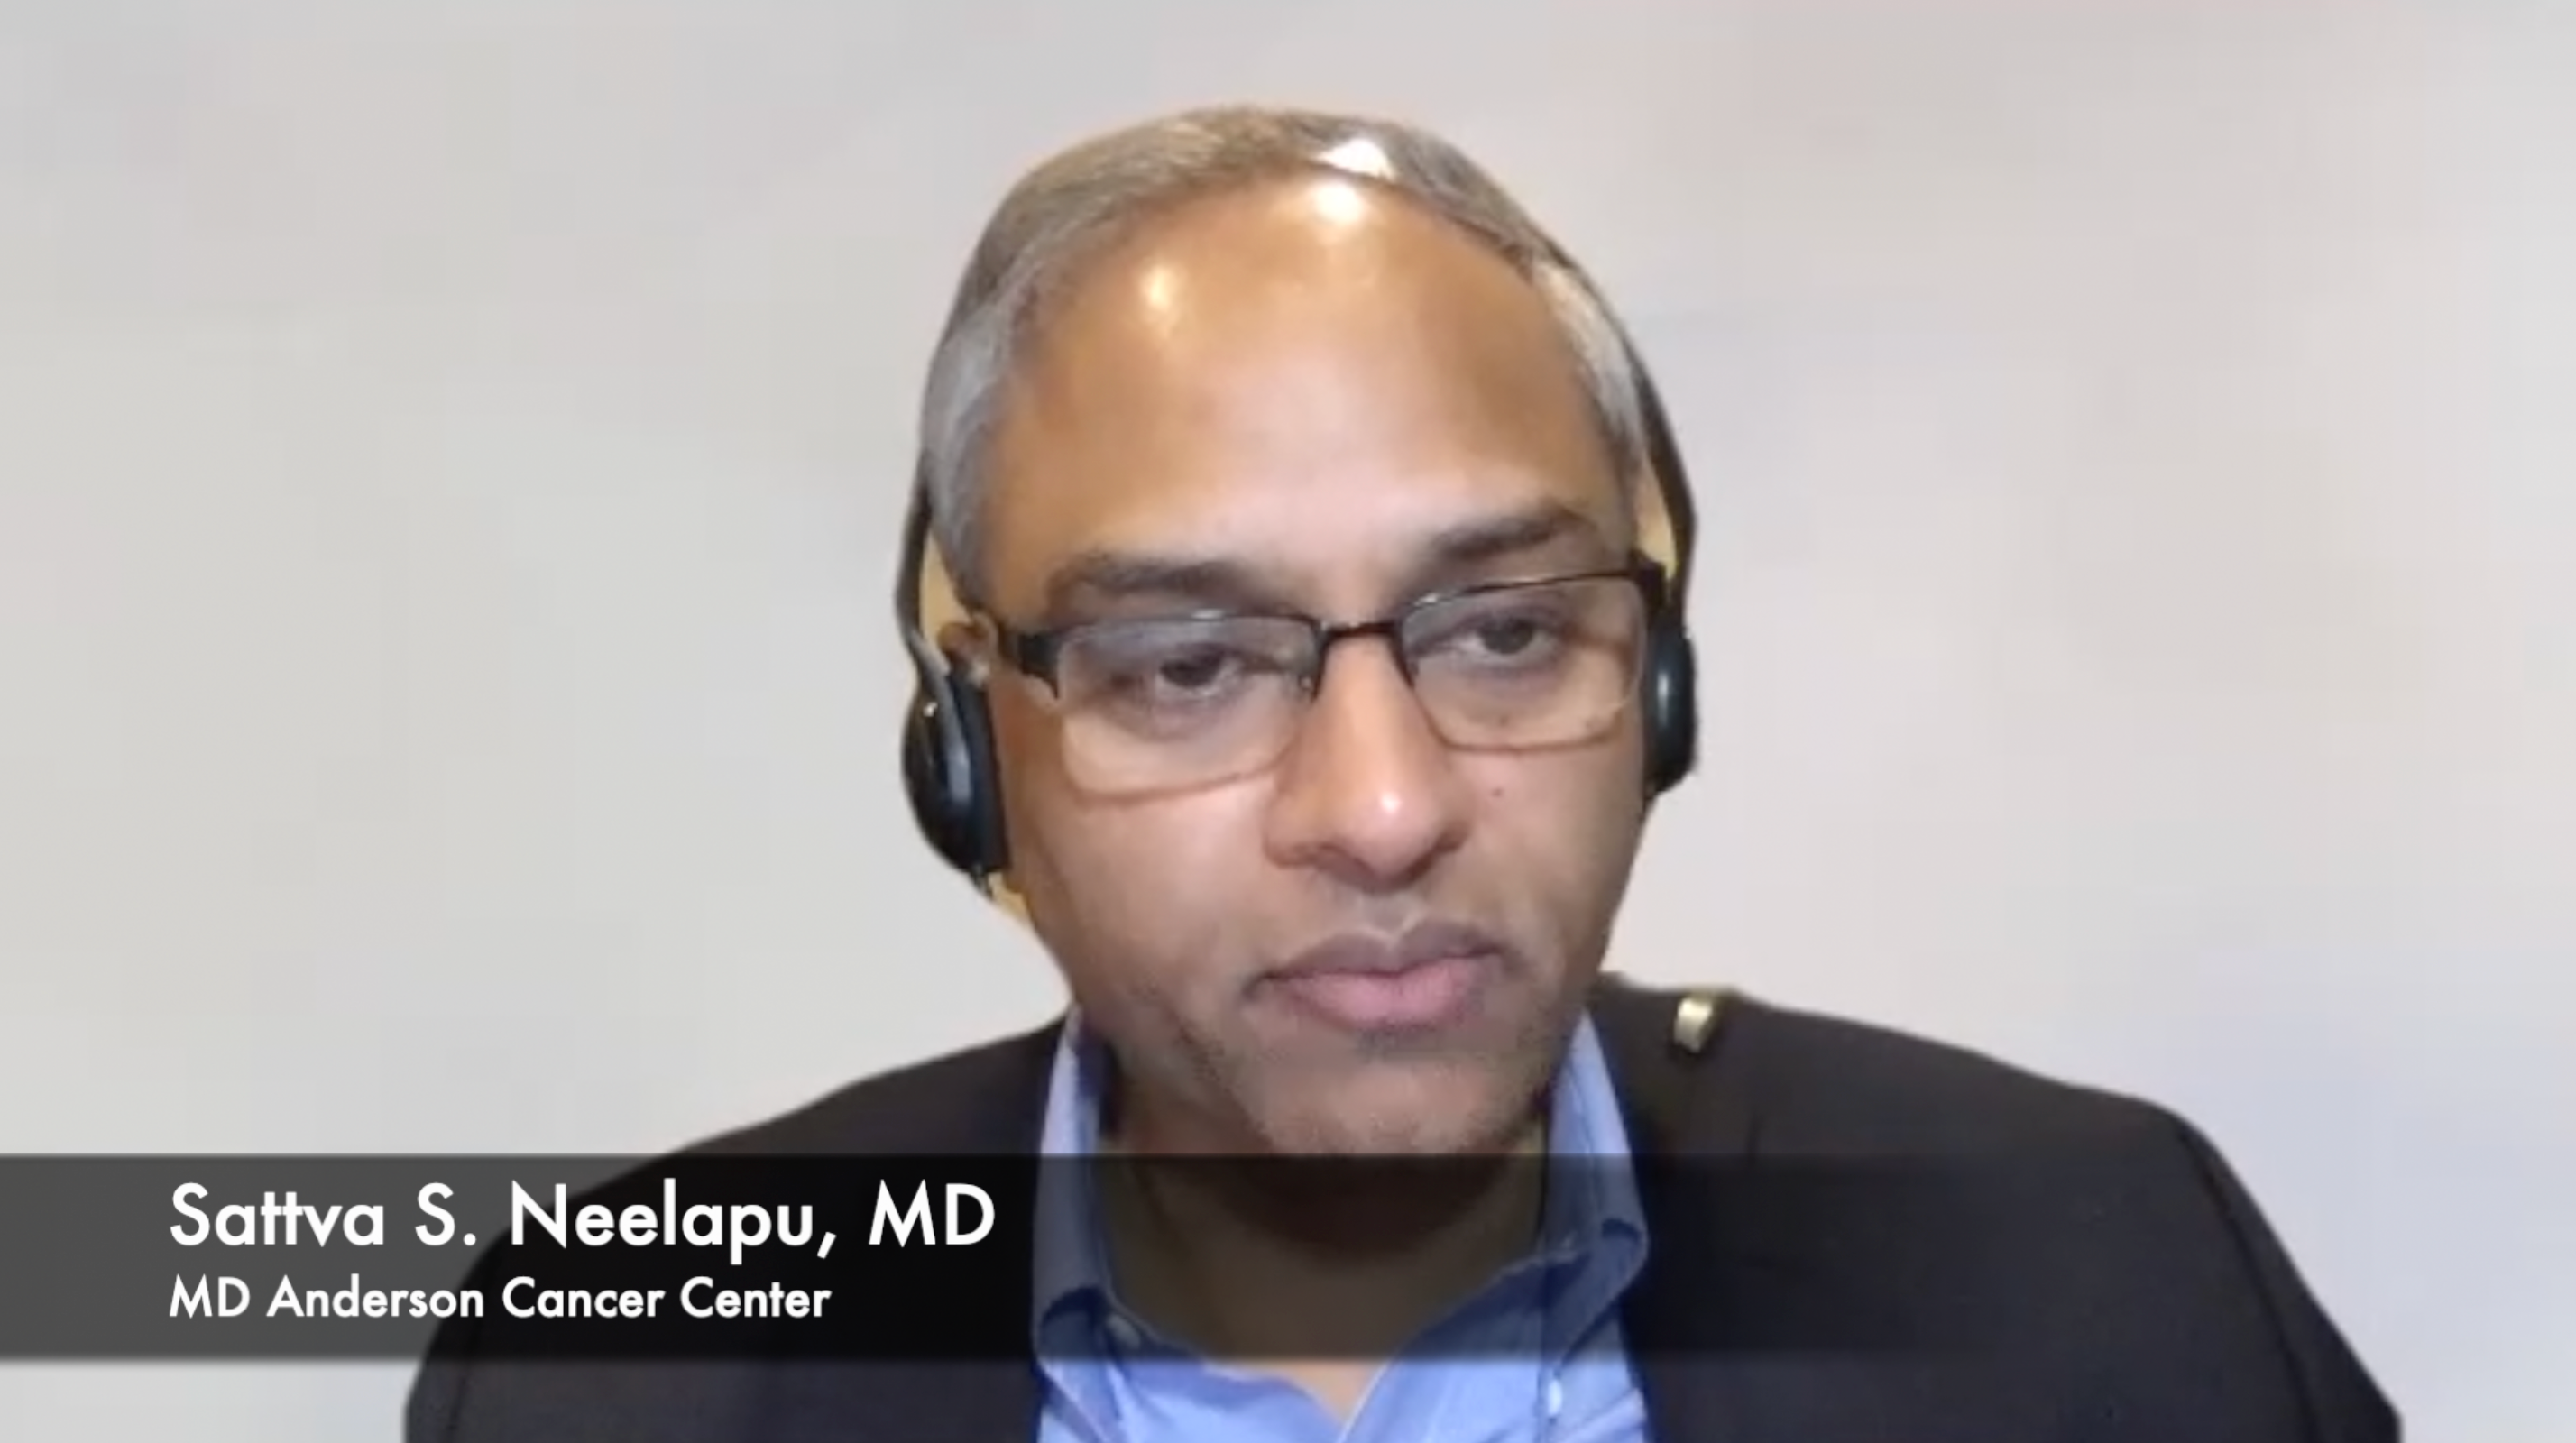 Sattva S. Neelapu, MD, Discusses Interesting Abstracts at 2021 ASH